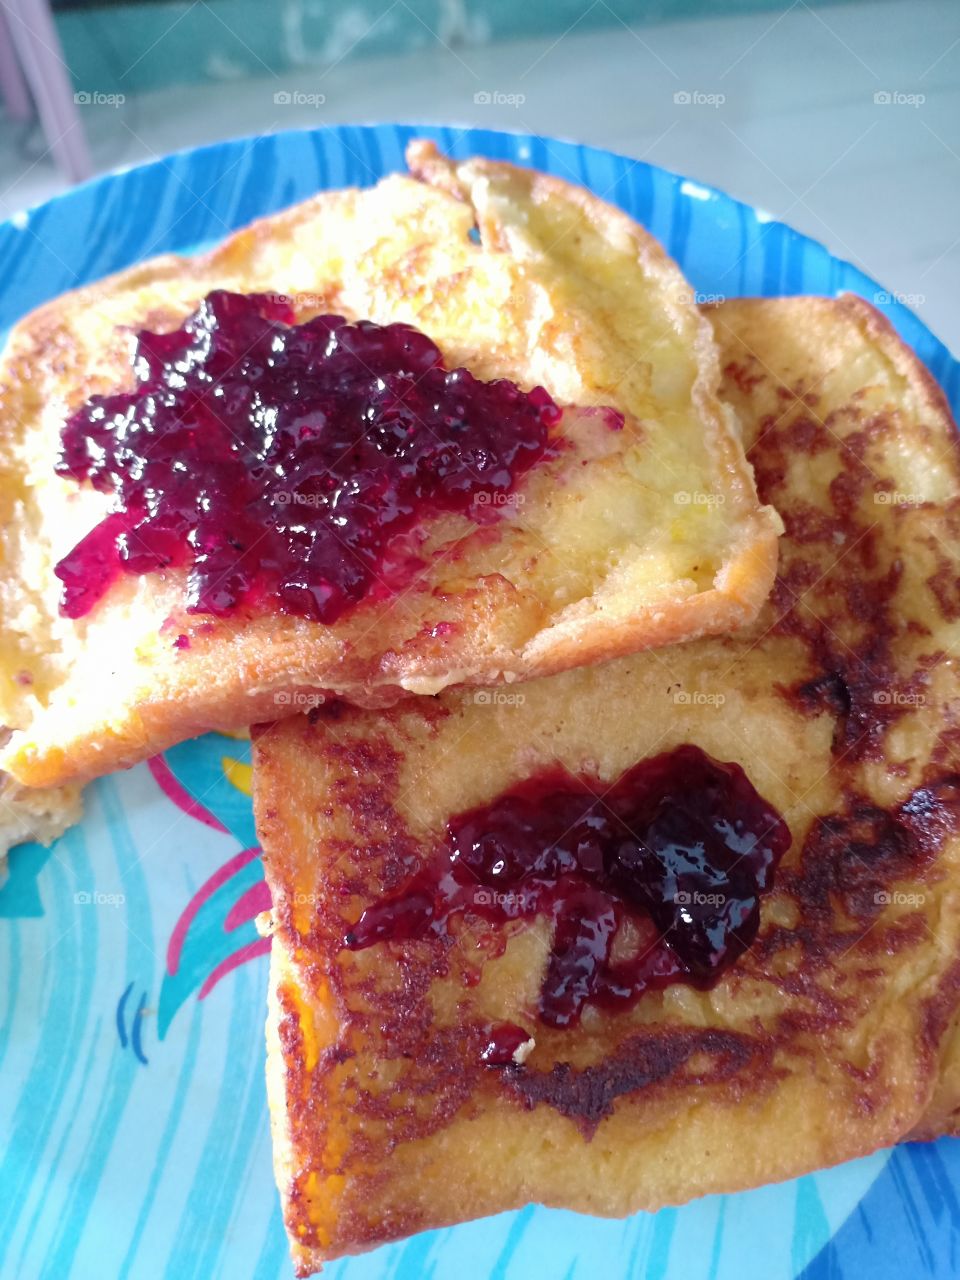 Homemade French toast with delicious blueberry jam